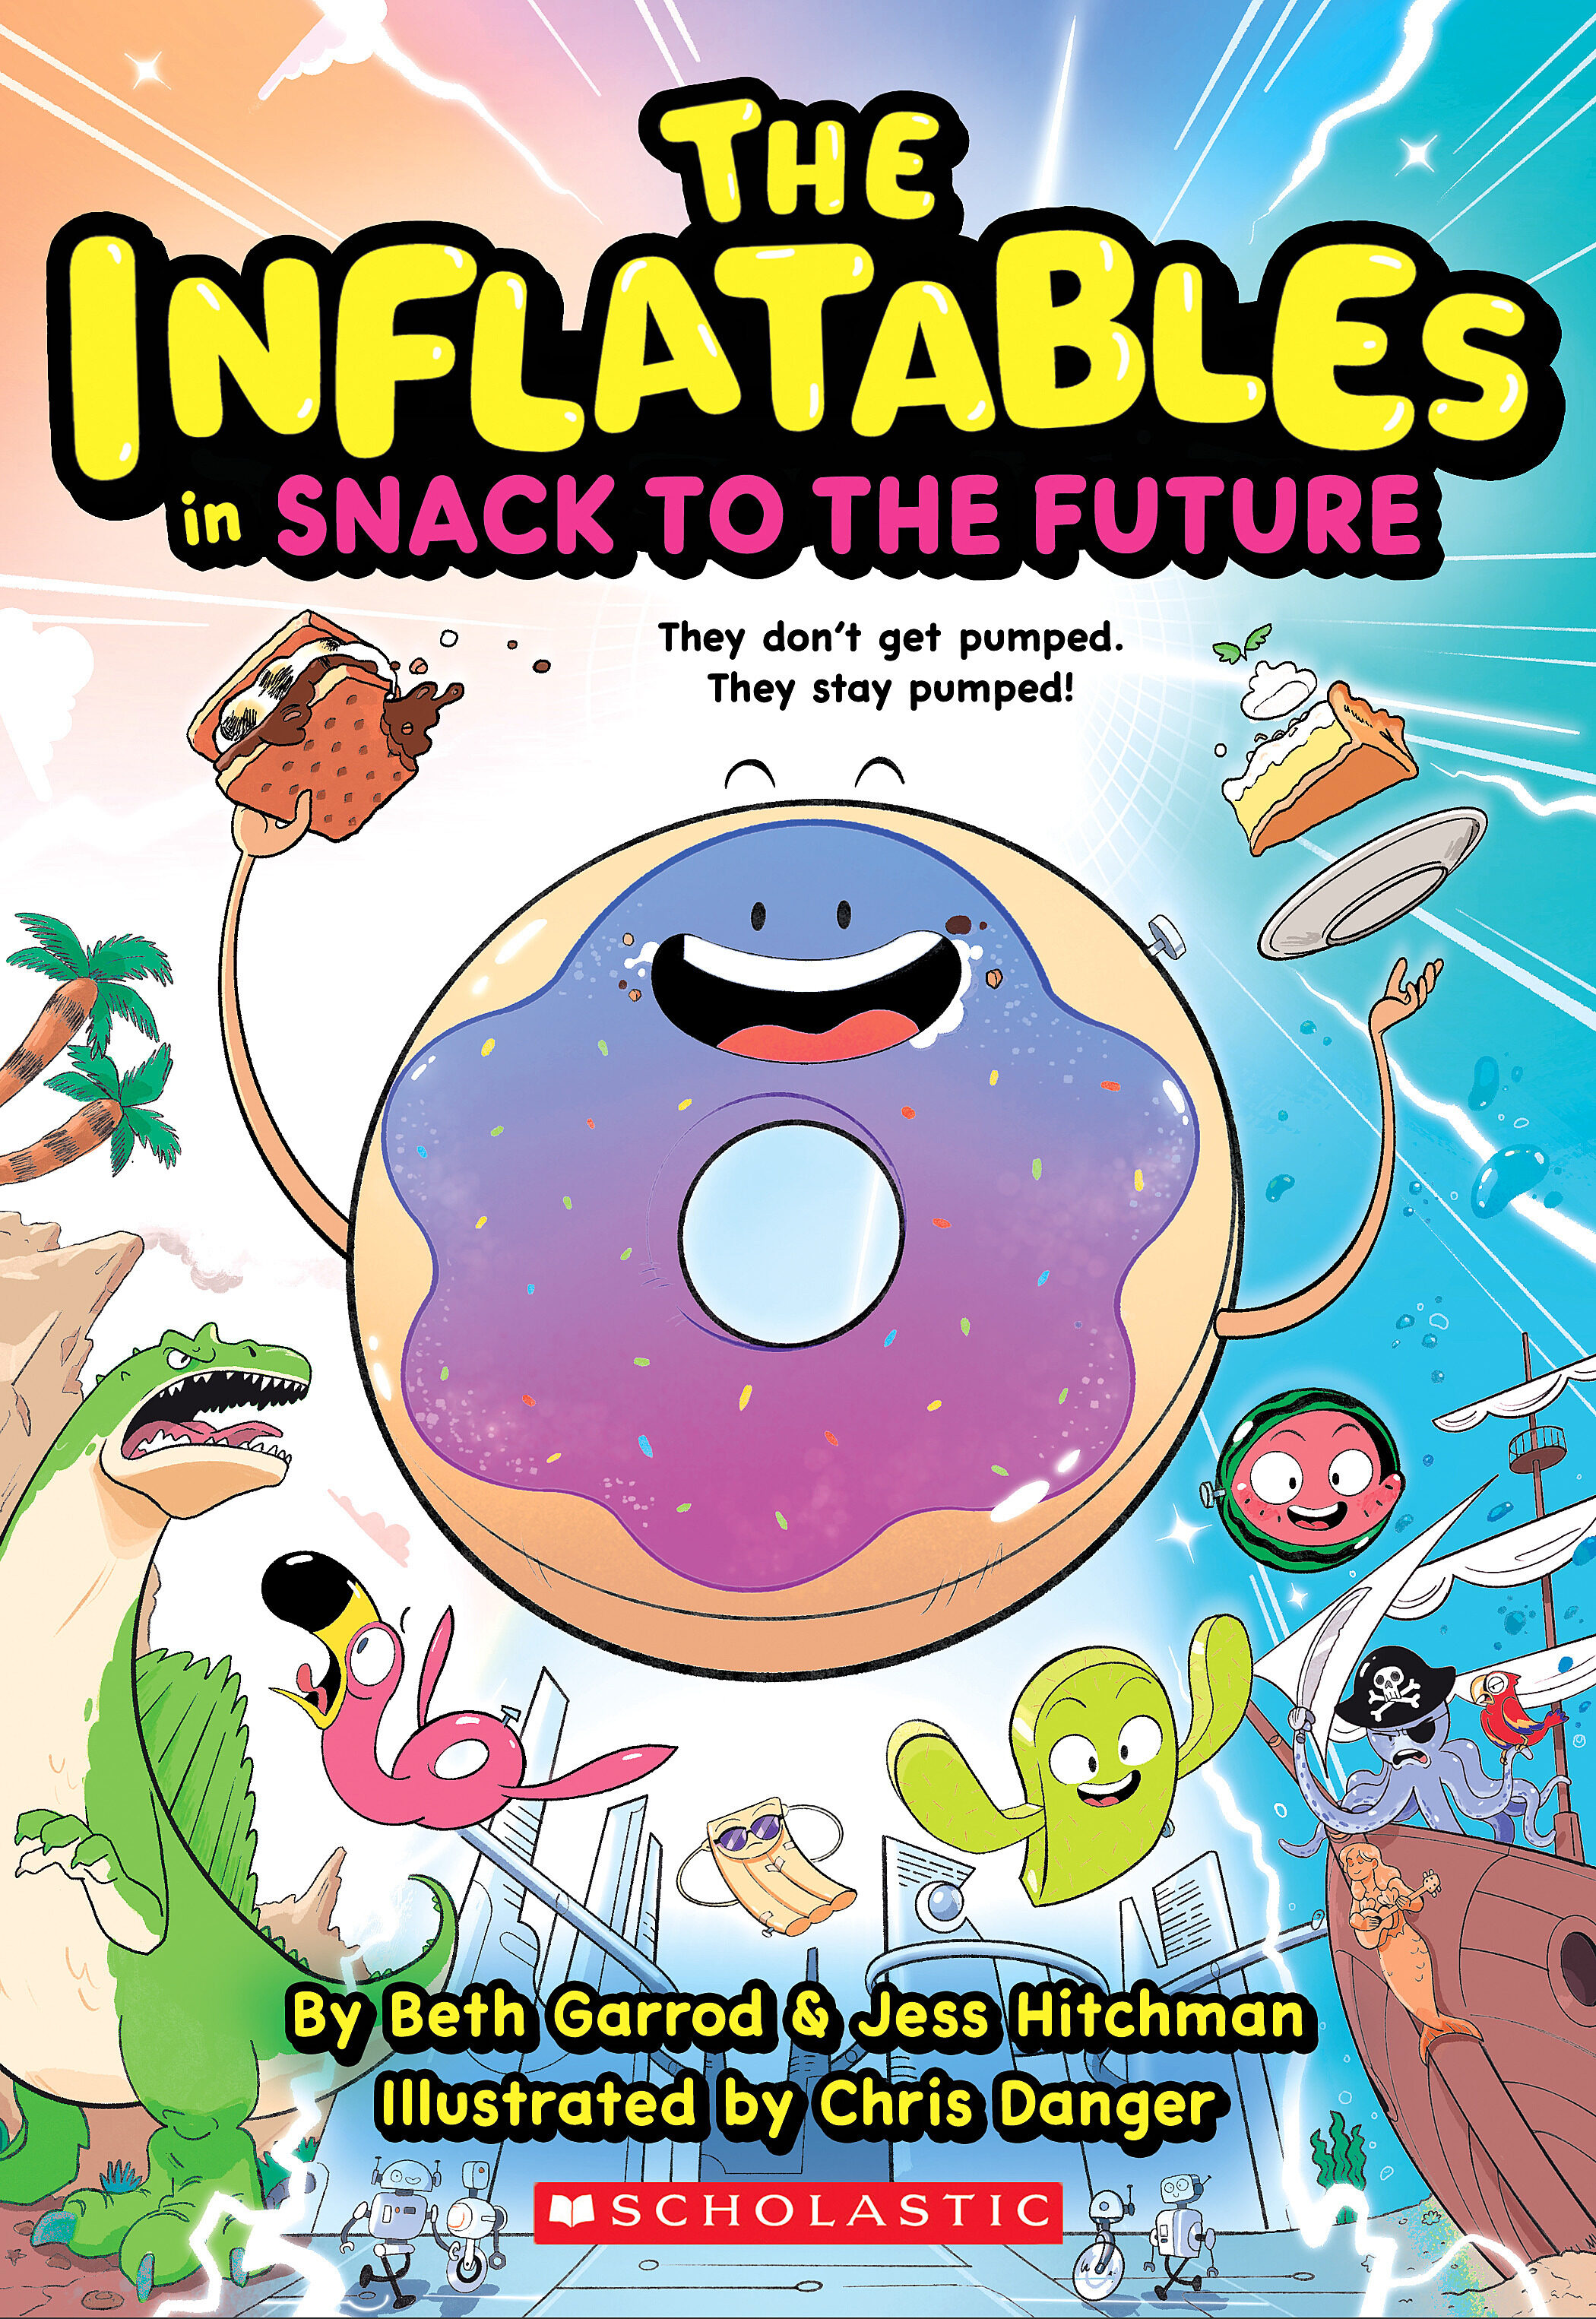 Image for "Inflatables in Snack to the Future (the Inflatables #5)"